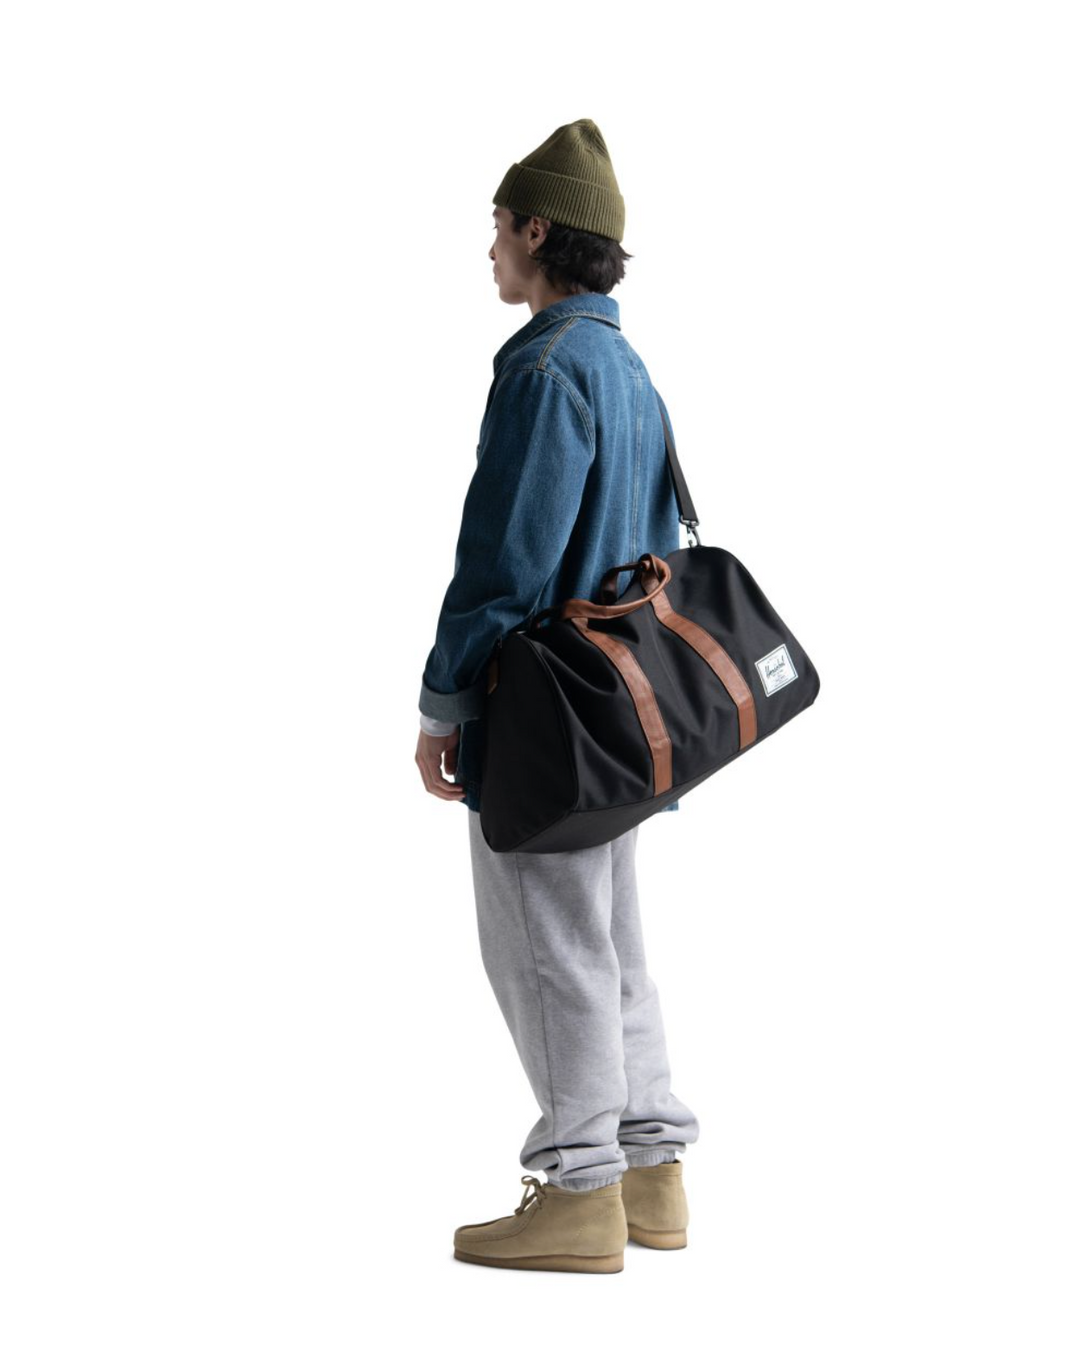 Man holding black and brown leather duffle bag